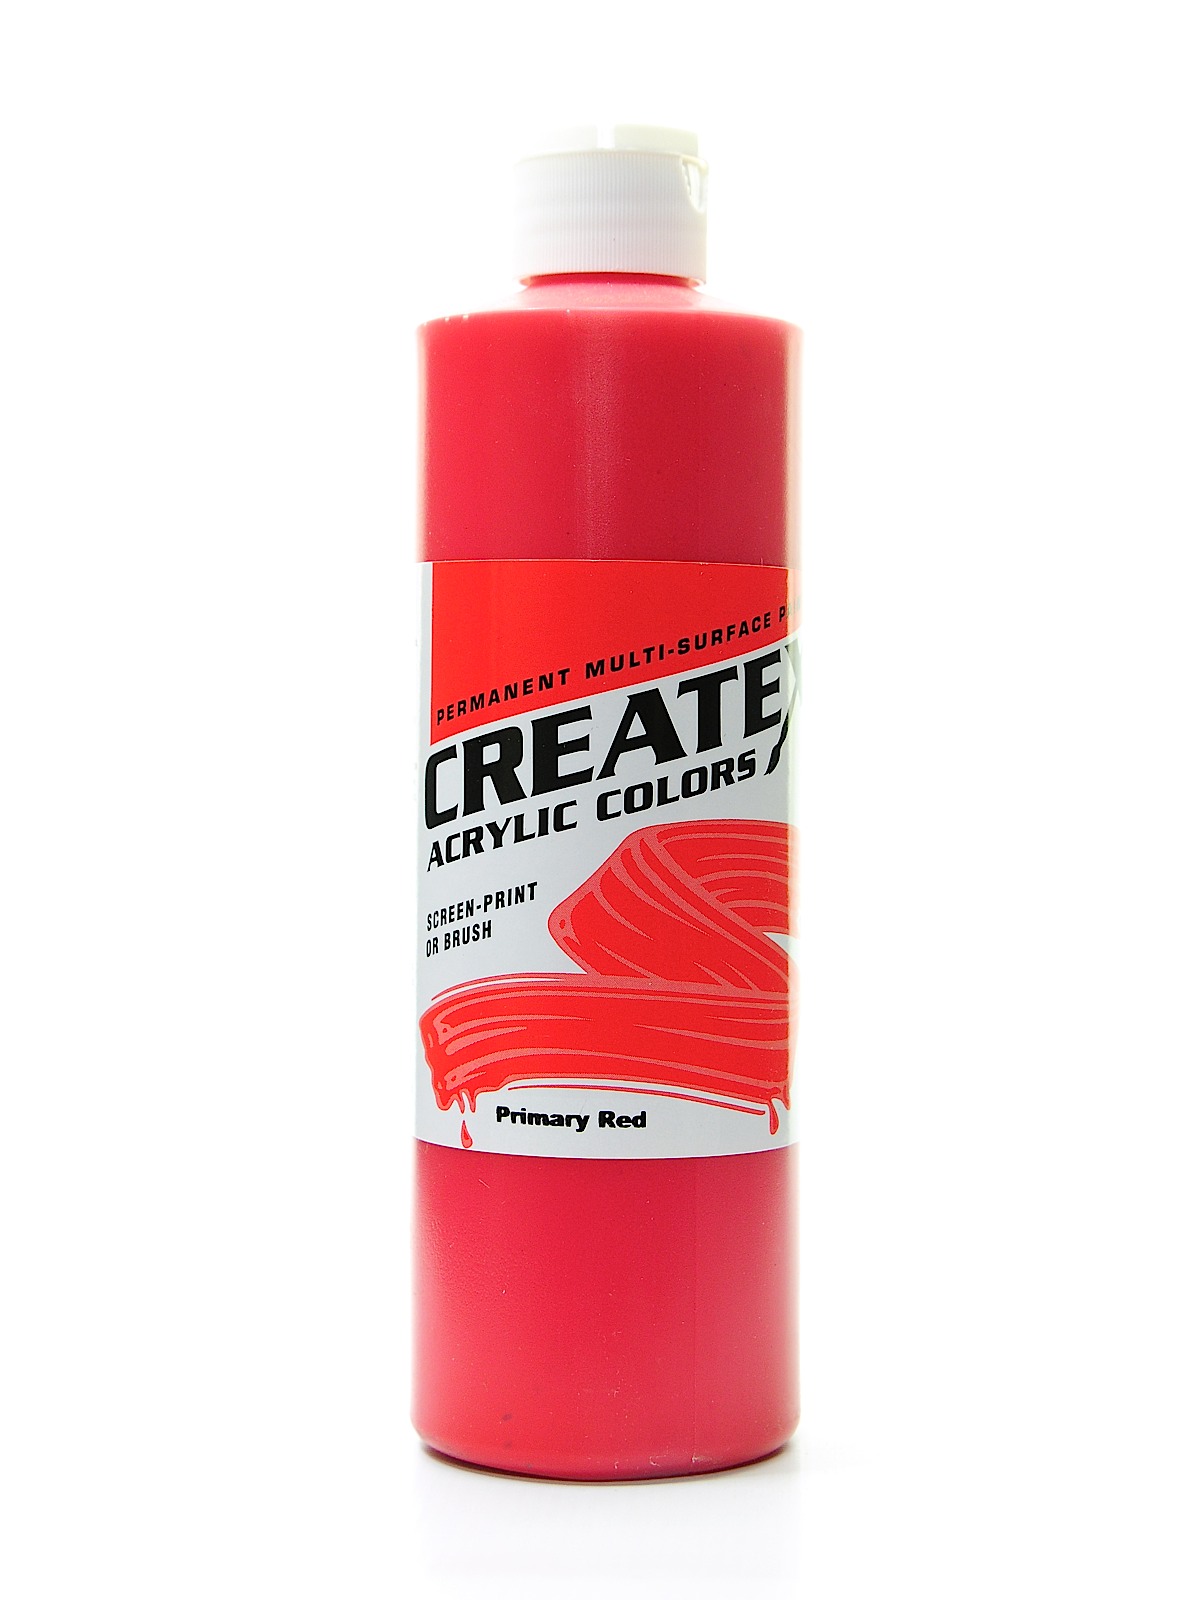 Acrylic Colors Primary Red 16 Oz.